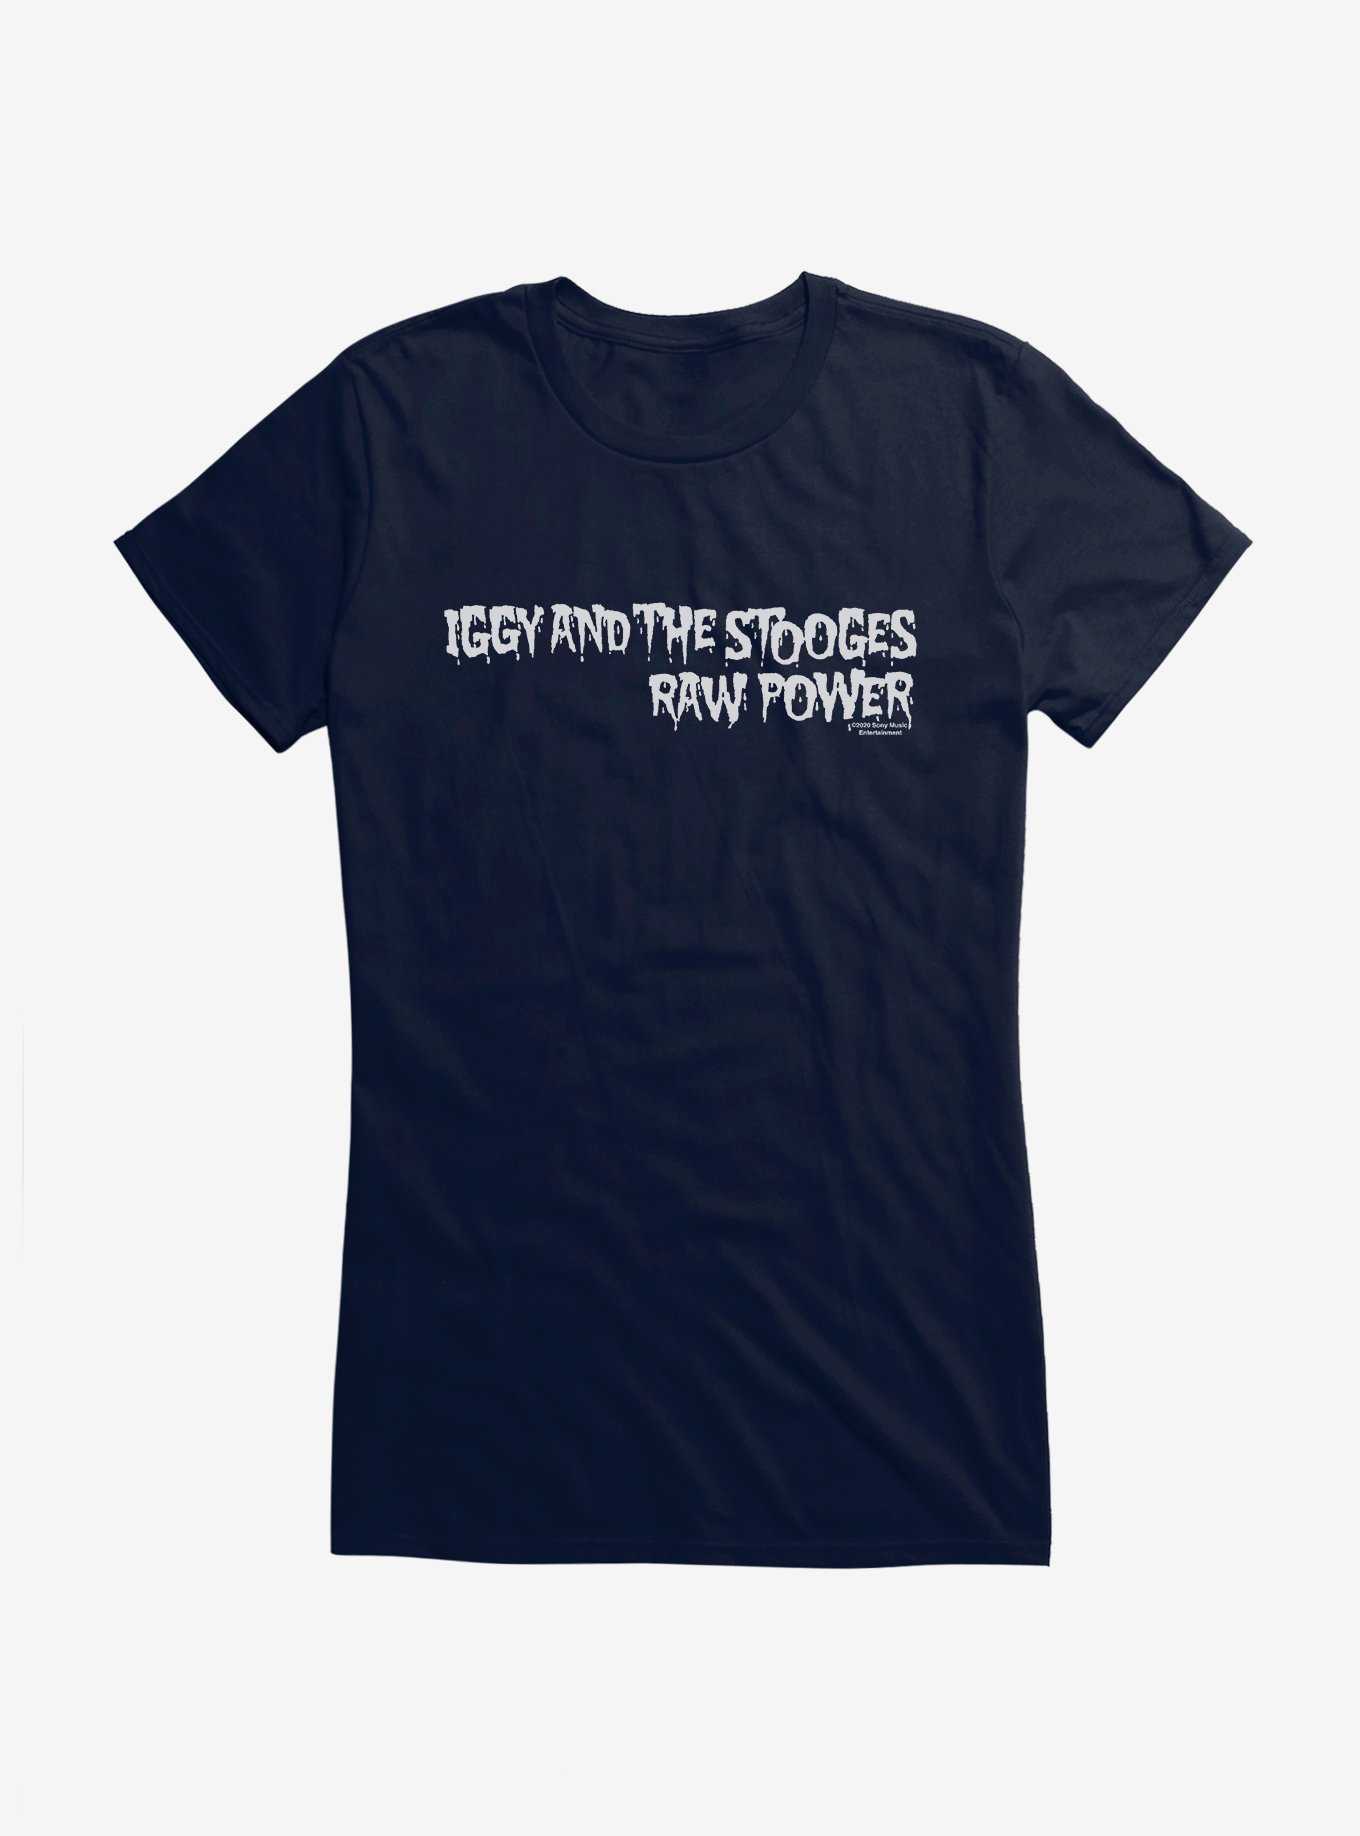 Iggy Pop And The Stooges Girls T-Shirt, , hi-res